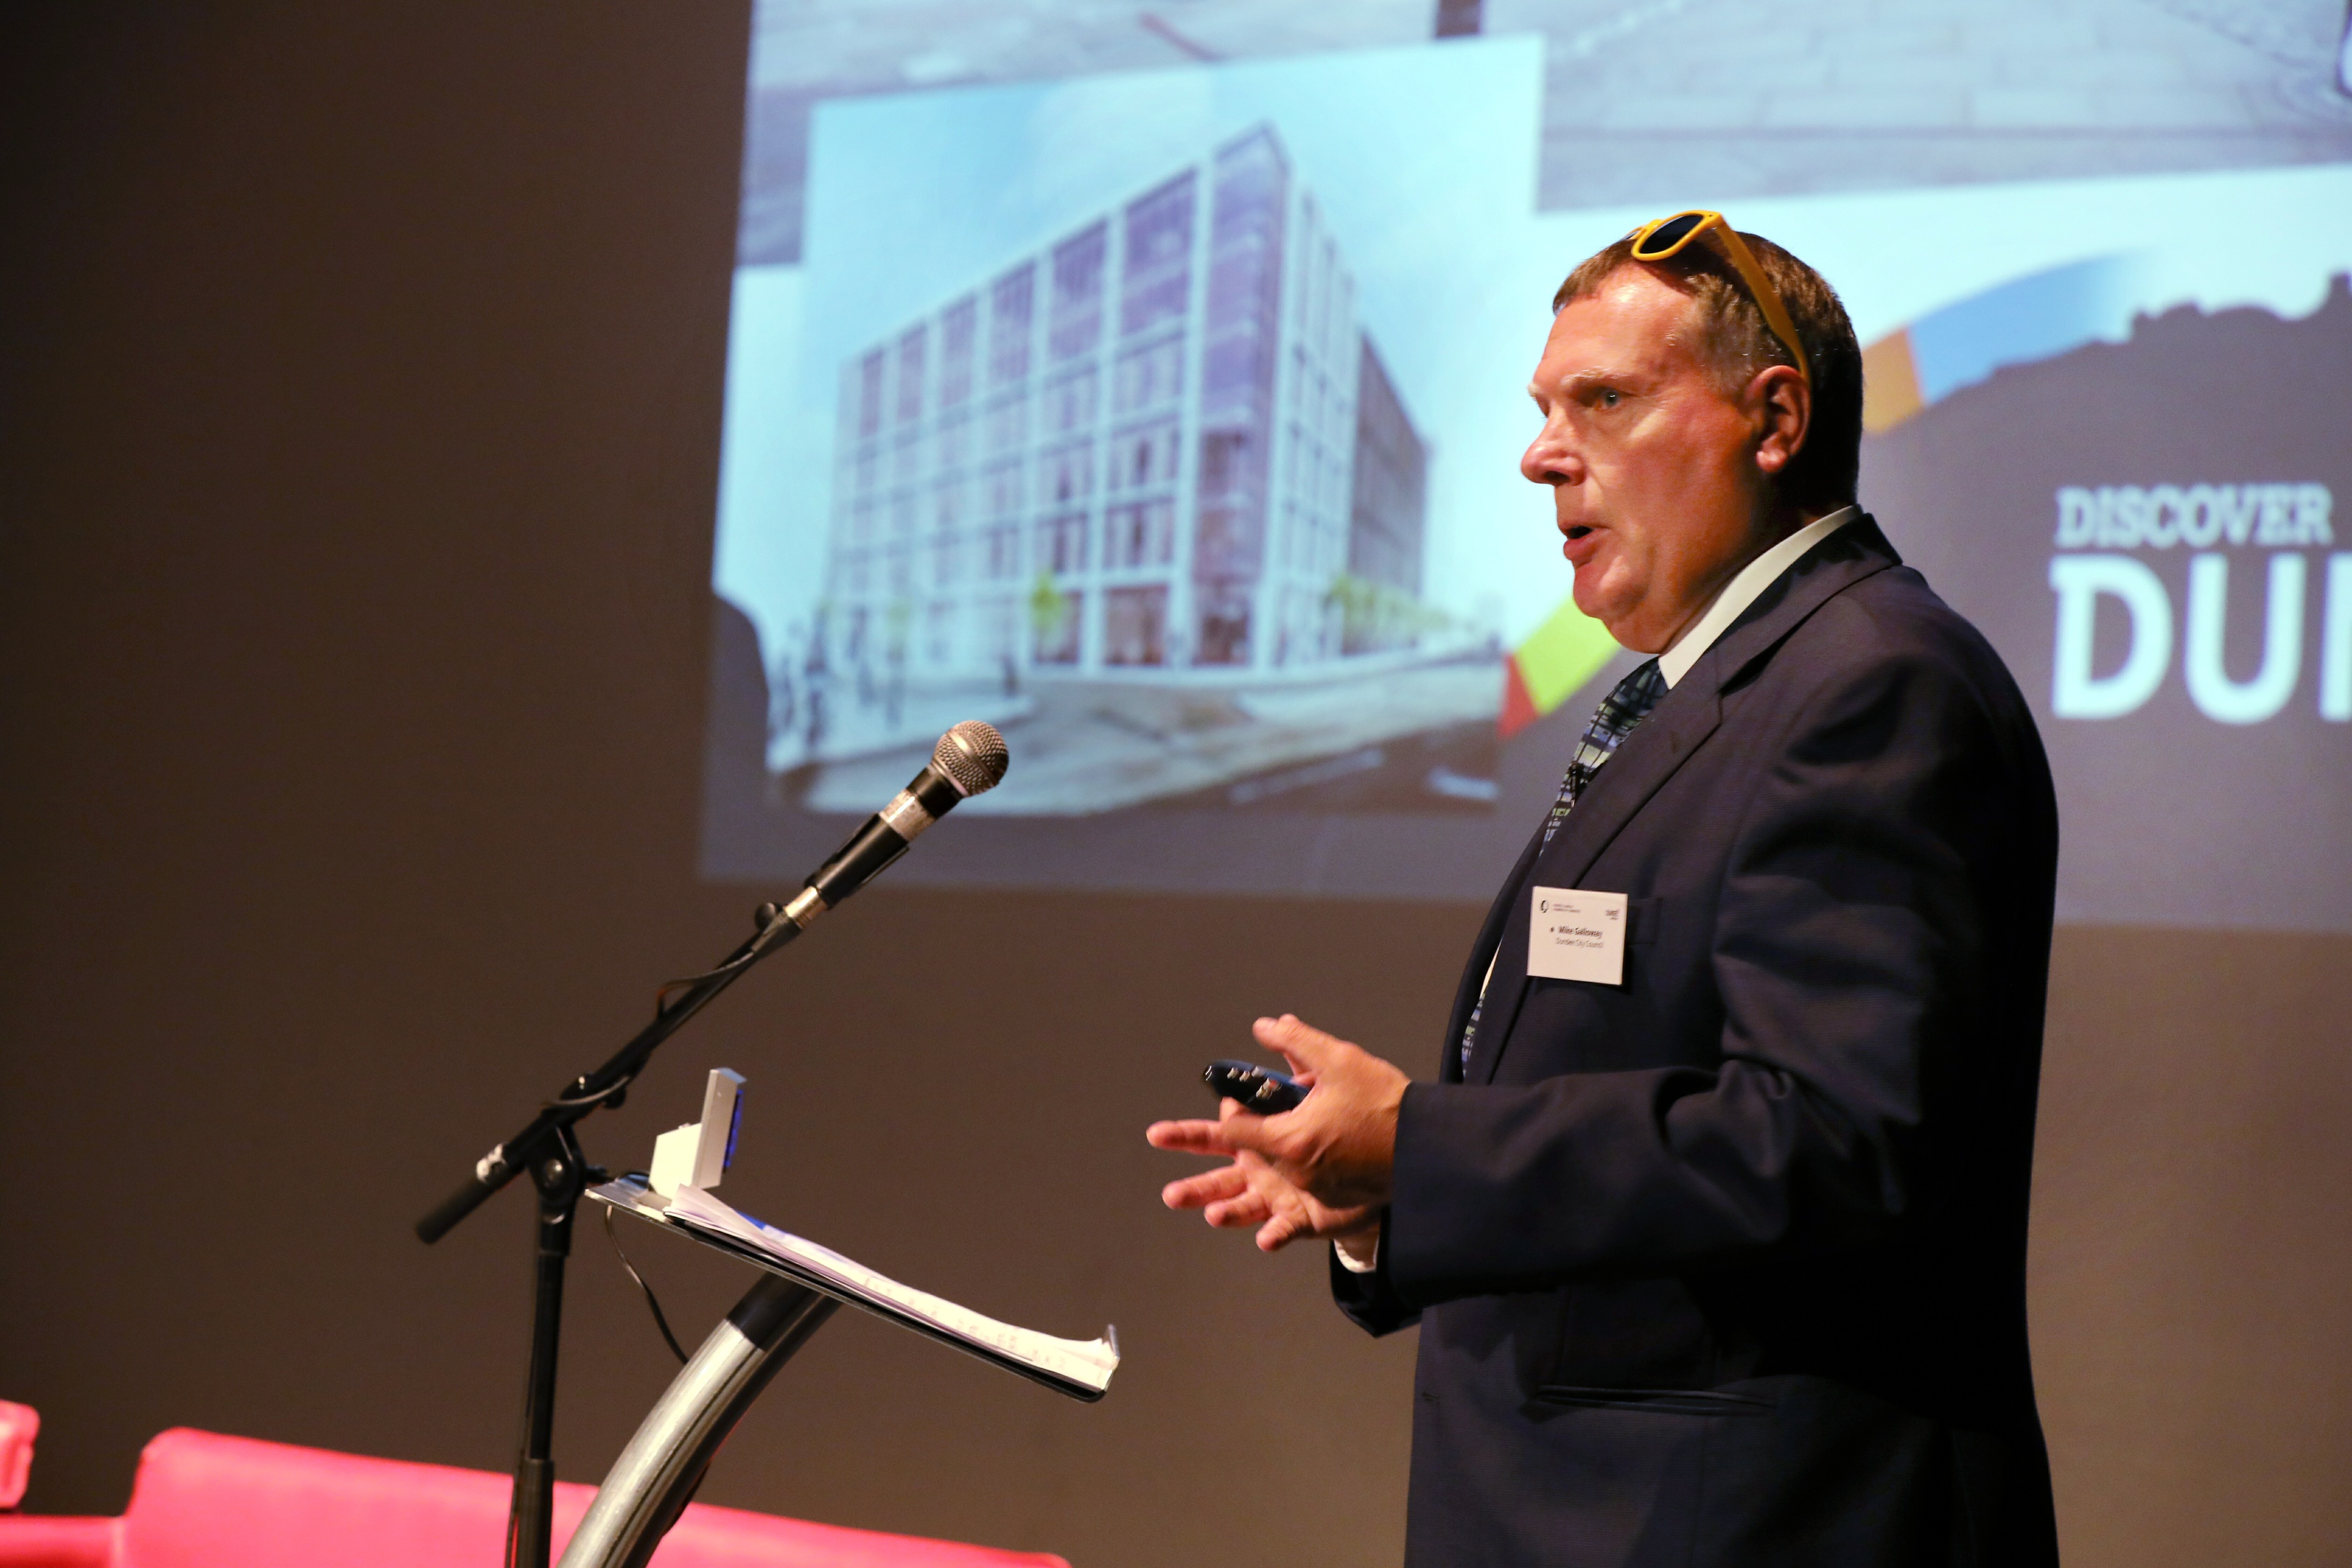 Mike Galloway leads a discussion on the Waterfront development during Wednesday's Dundee Economic Summit.